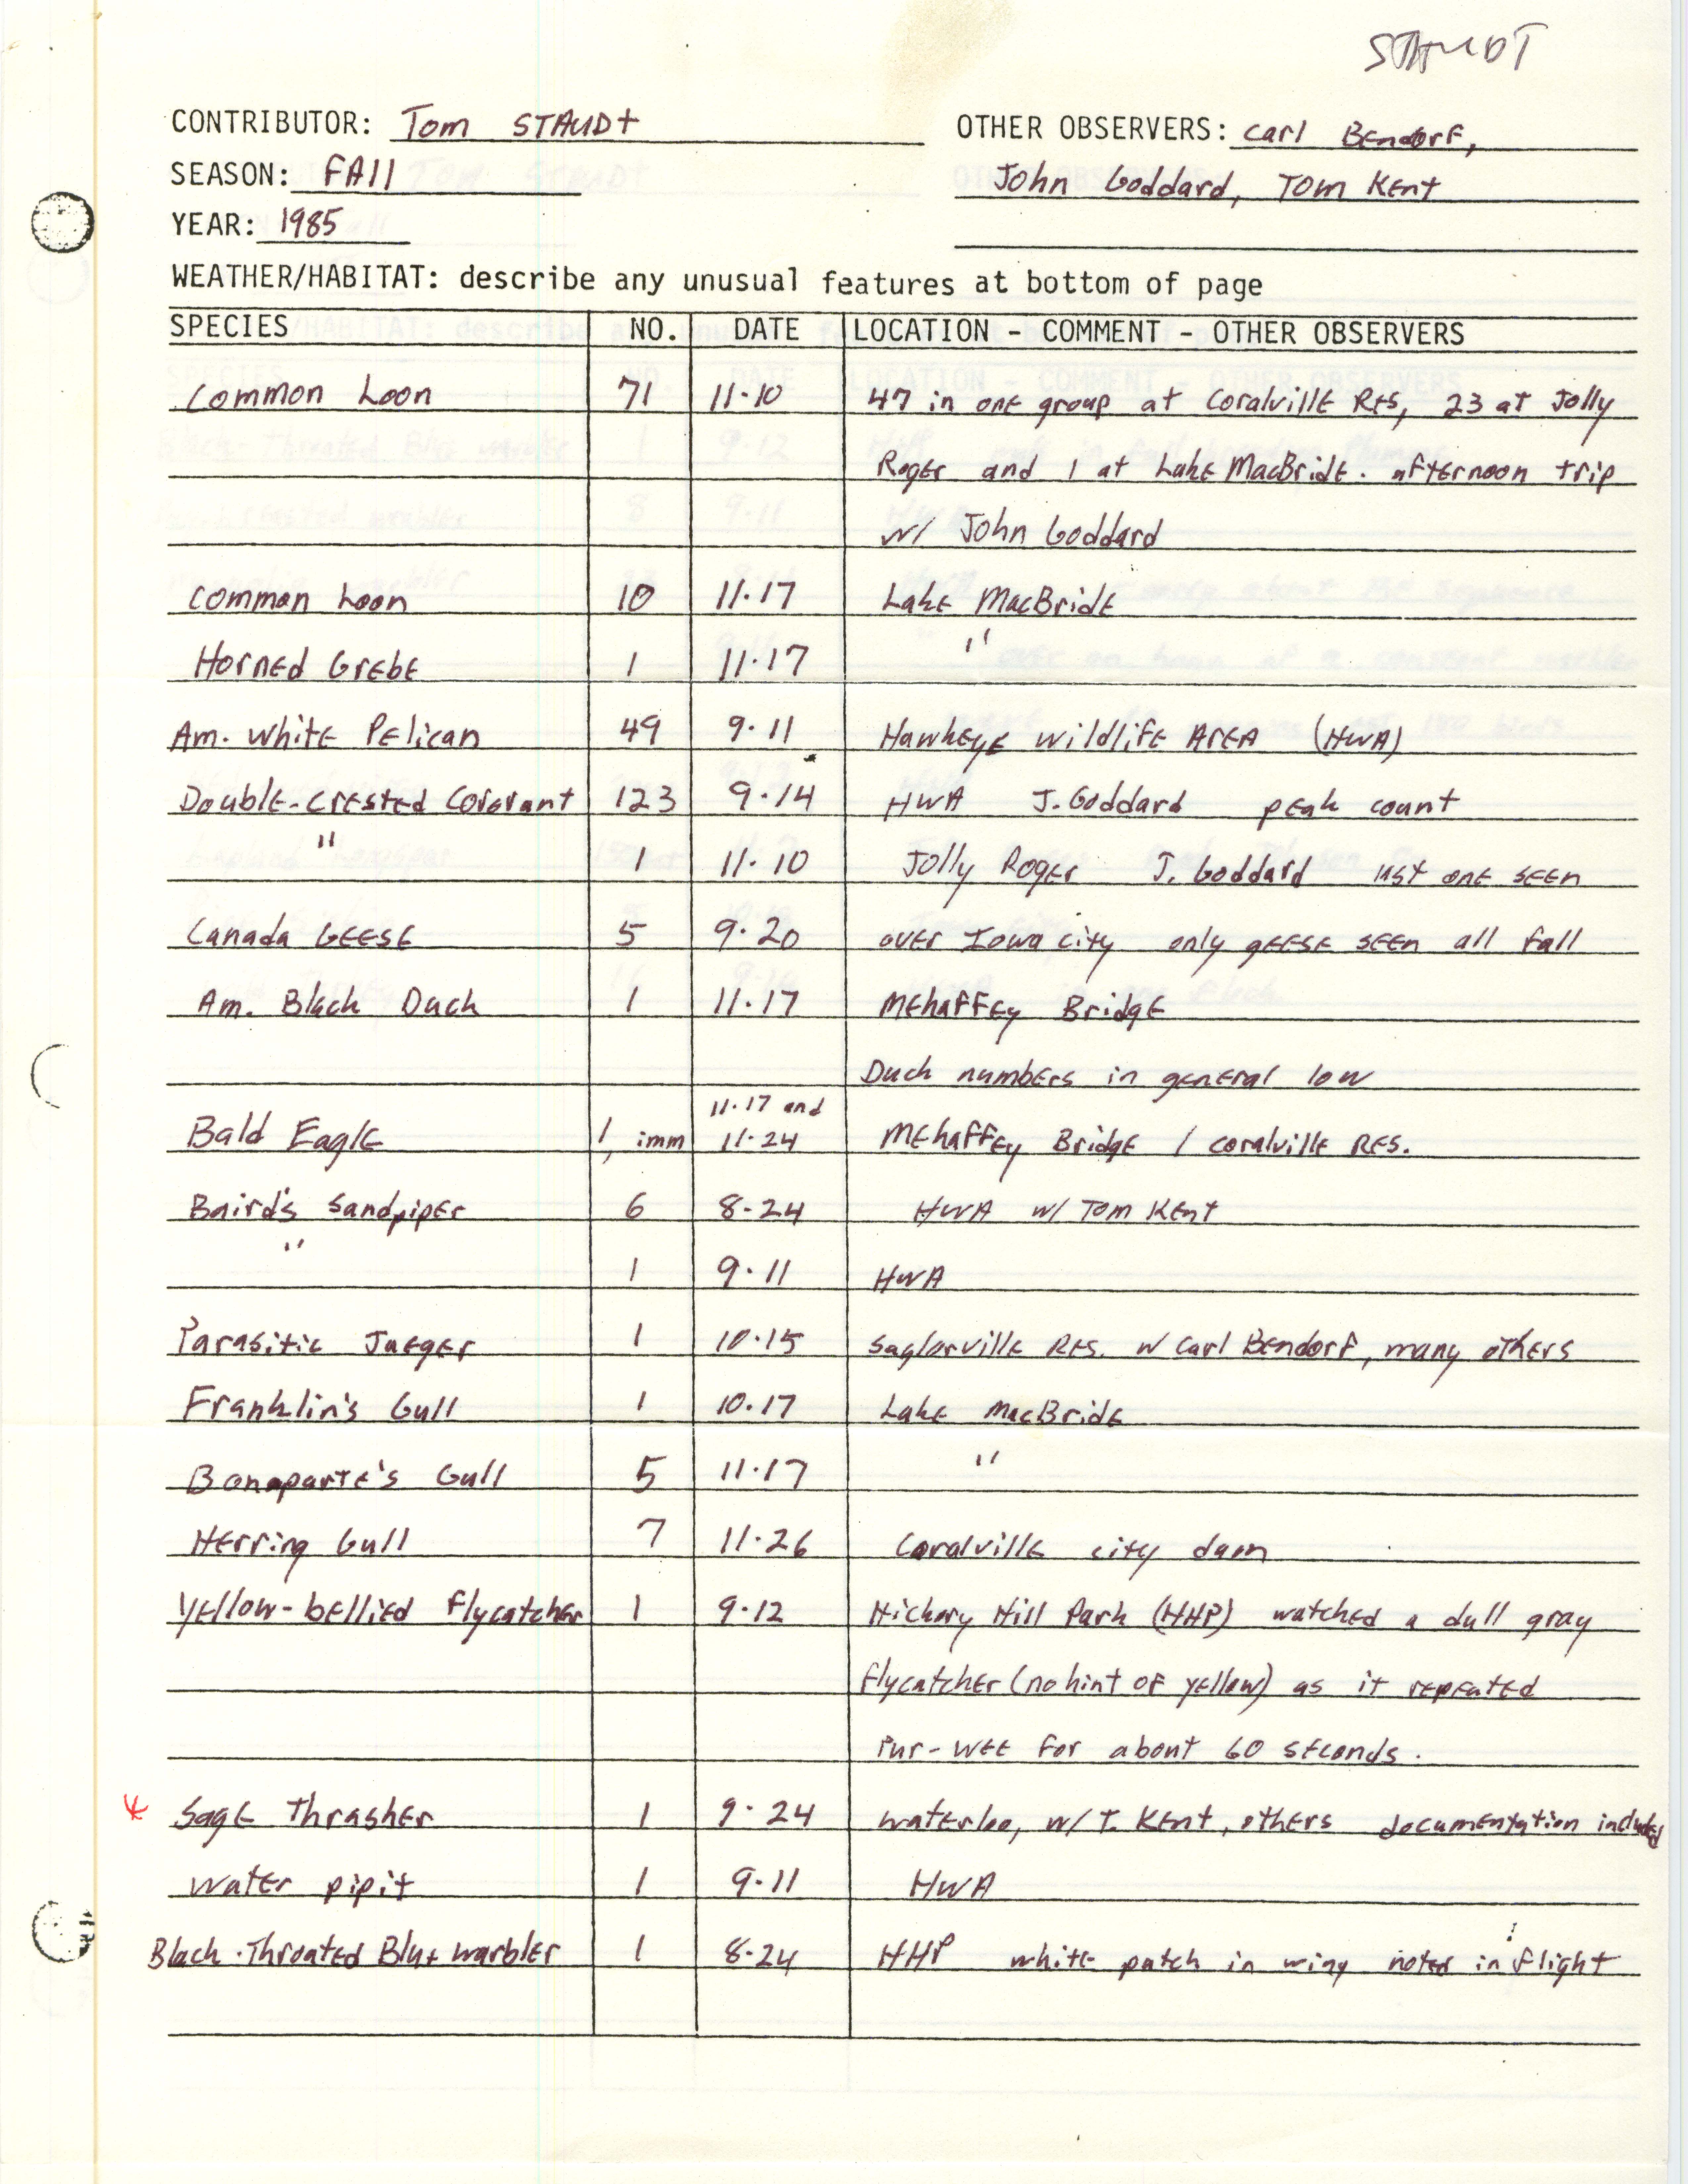 Annotated bird sighting list for Fall 1985 compiled by Tom Staudt